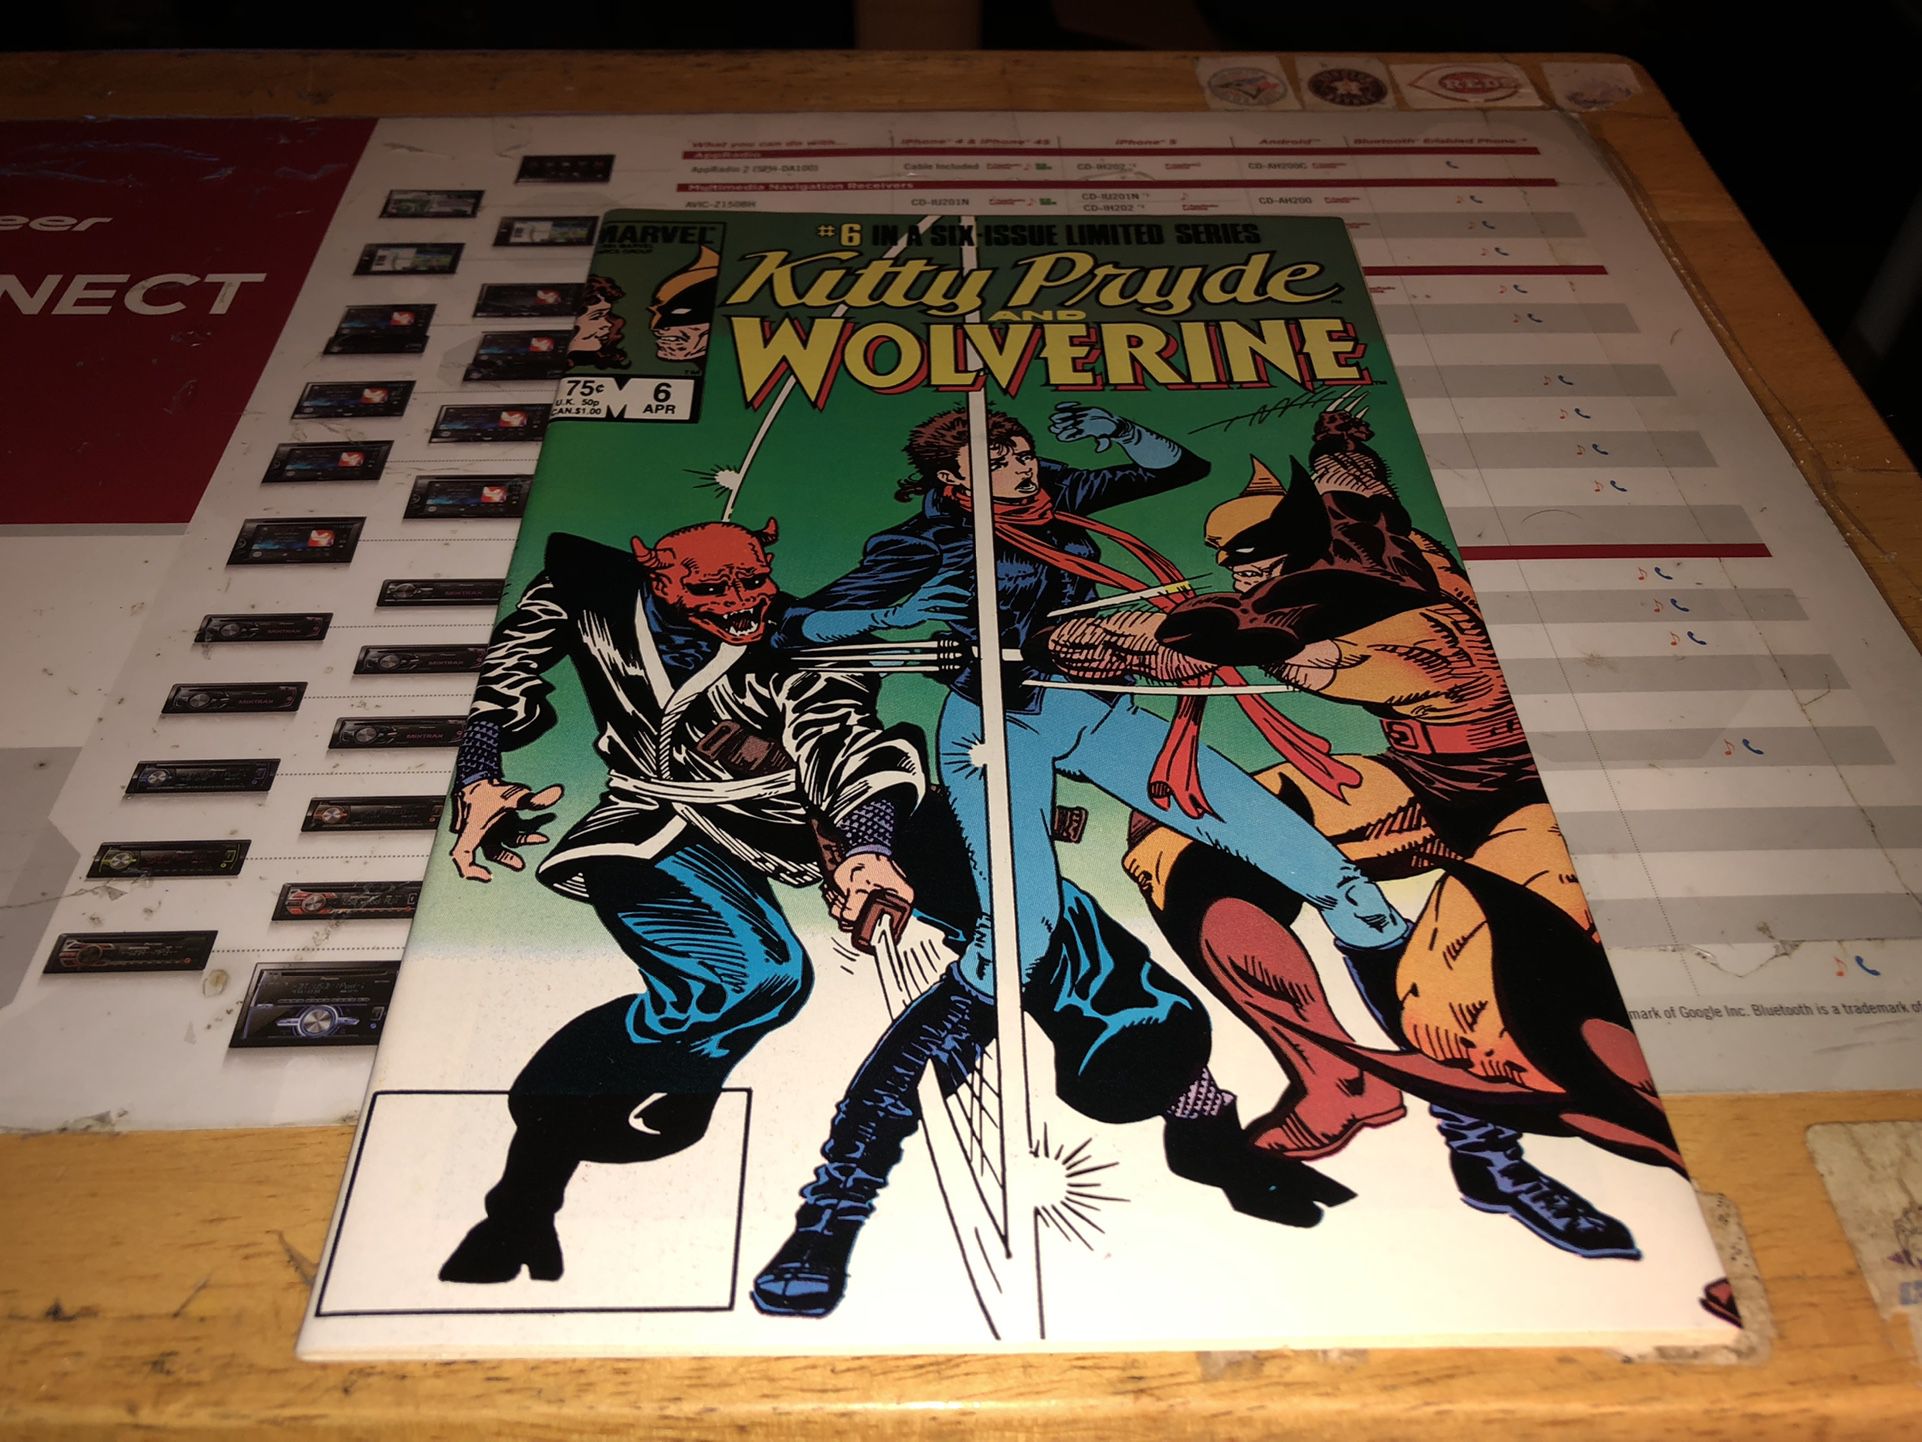 Marvel Comics #6 In A Six - Issue Limited Series Kitty Prude And Wolverine 